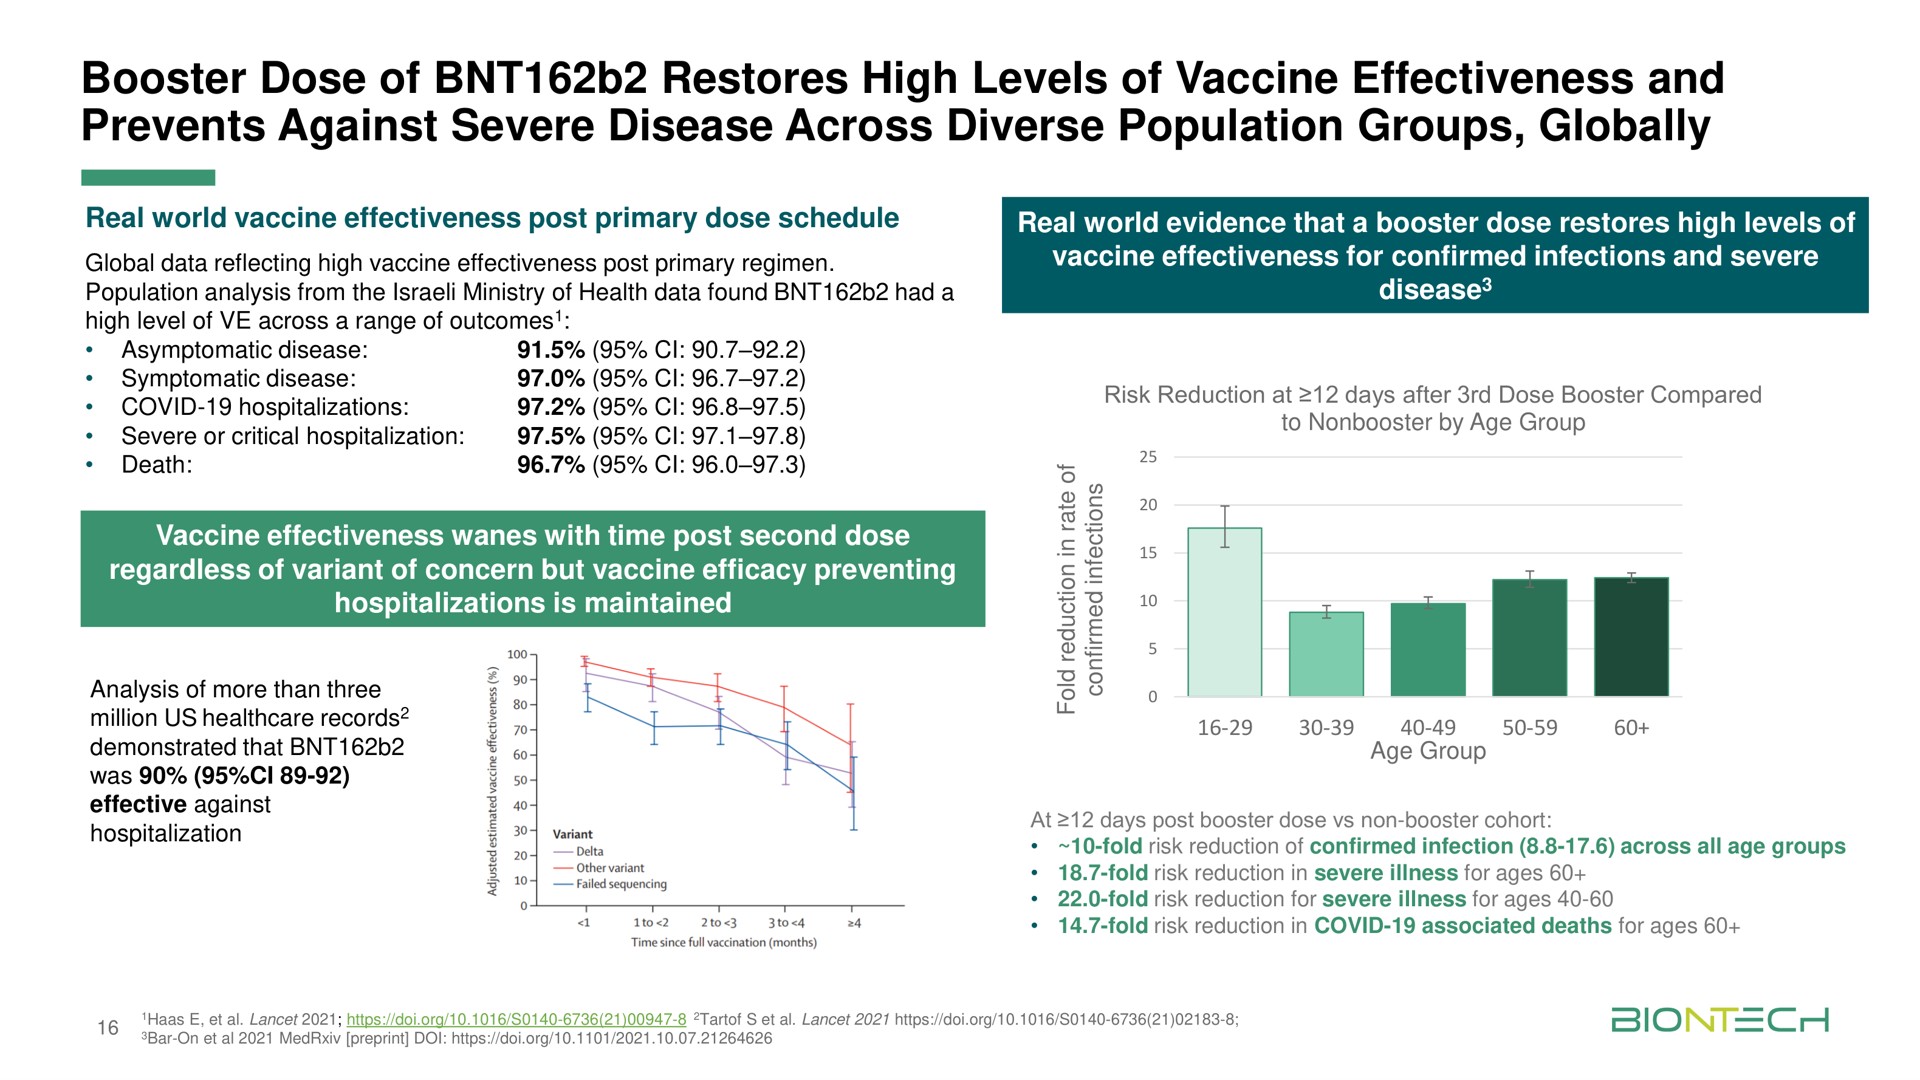 booster dose of restores high levels of vaccine effectiveness and prevents against severe disease across diverse population groups globally | BioNTech